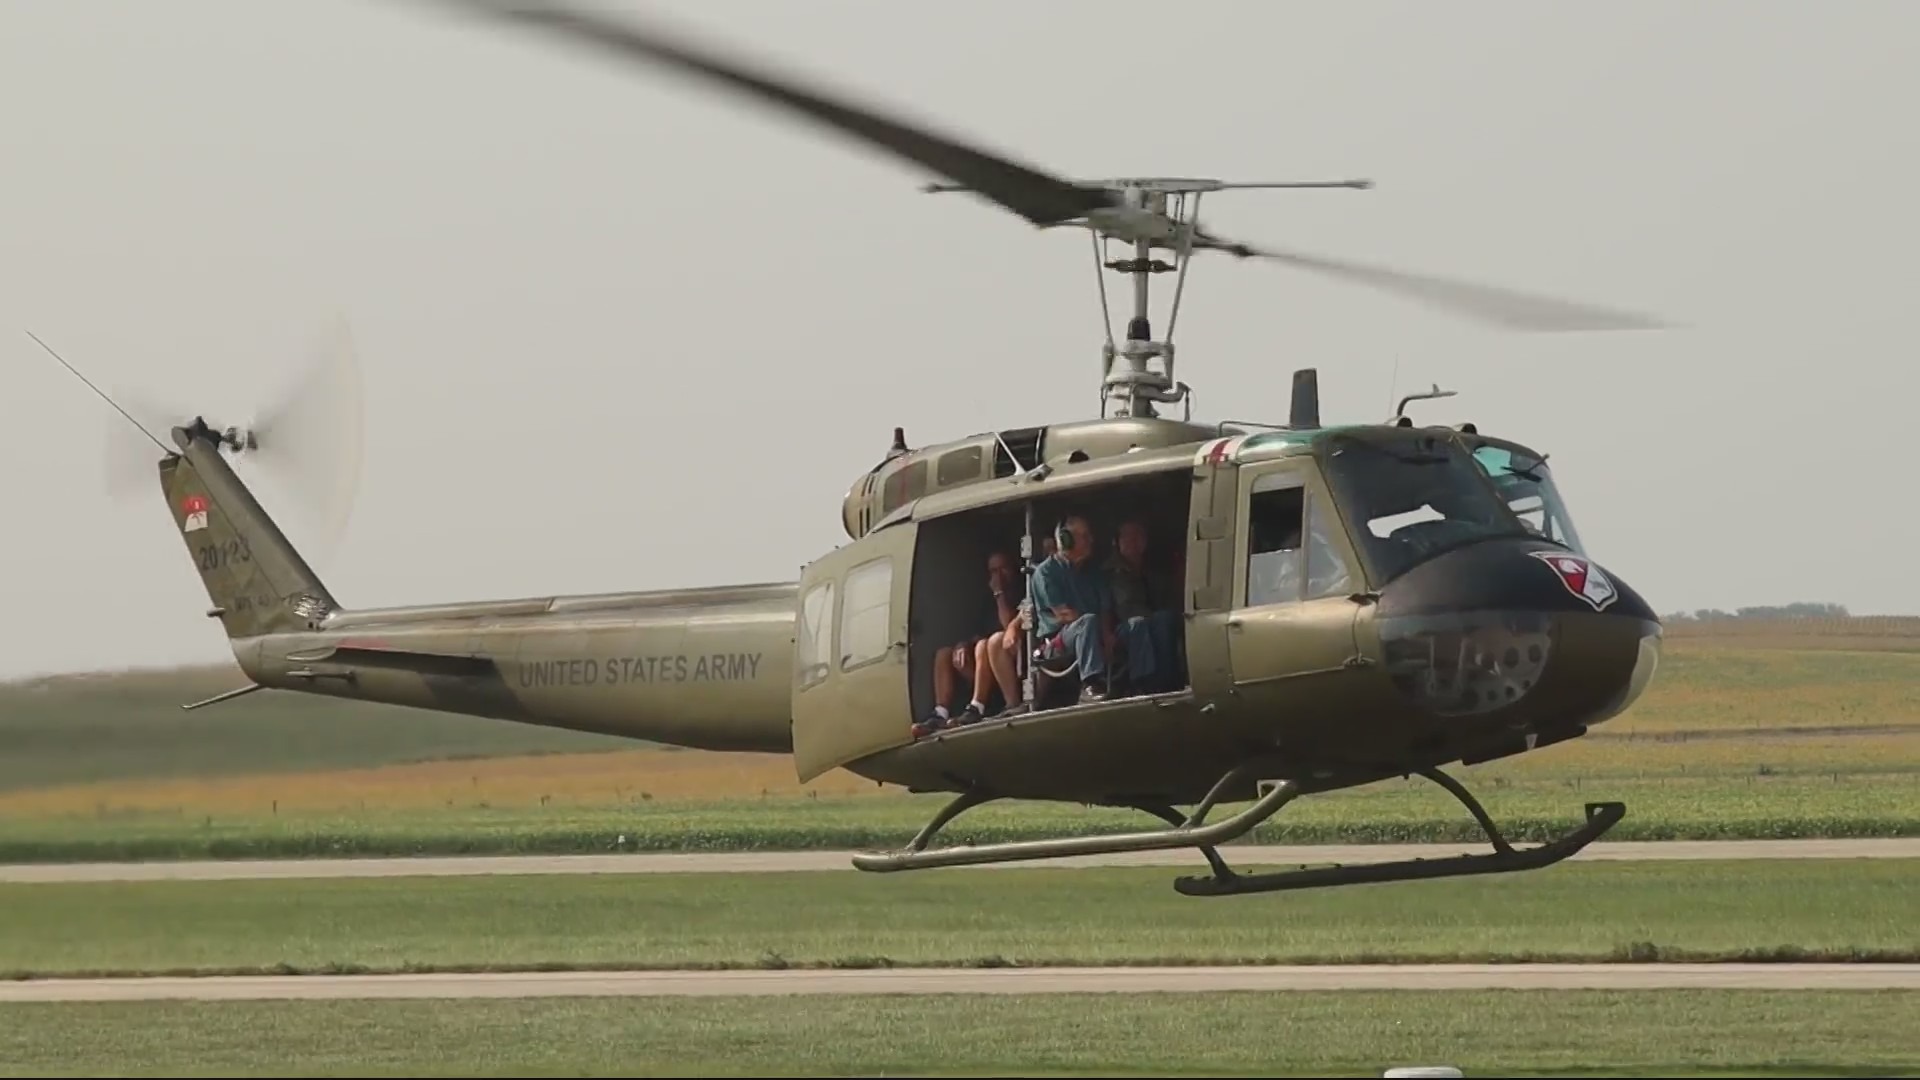 Huey helicopter provides rides to honor Vietnam veterans in Iowa